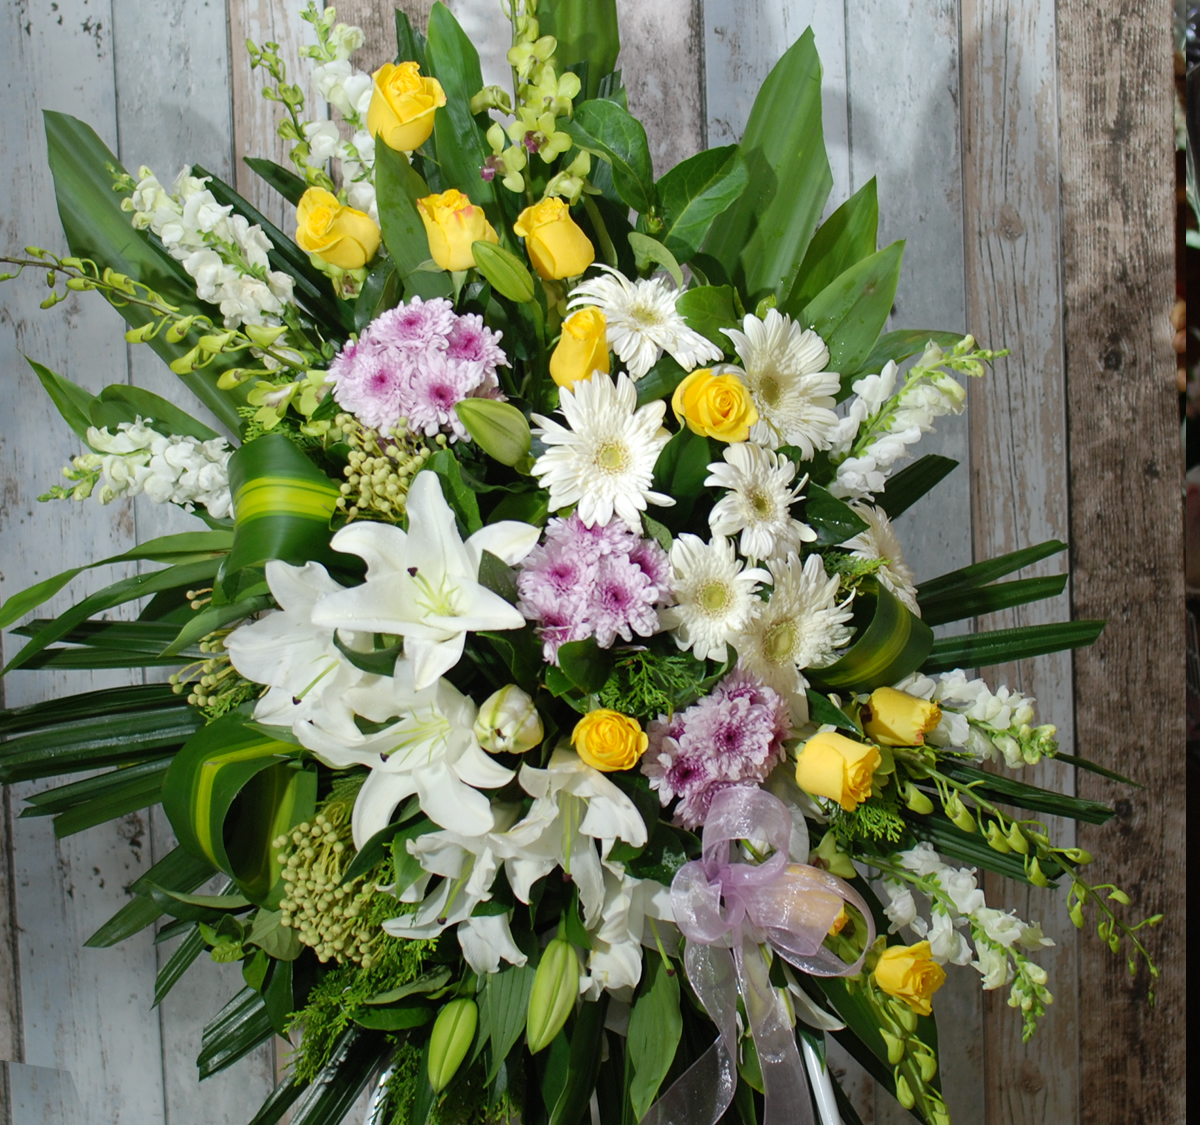 A floral arrangement with yellow roses, white lilies, white daisies, and pink carnation accents amidst green foliage, displayed against a textured wooden backdrop.